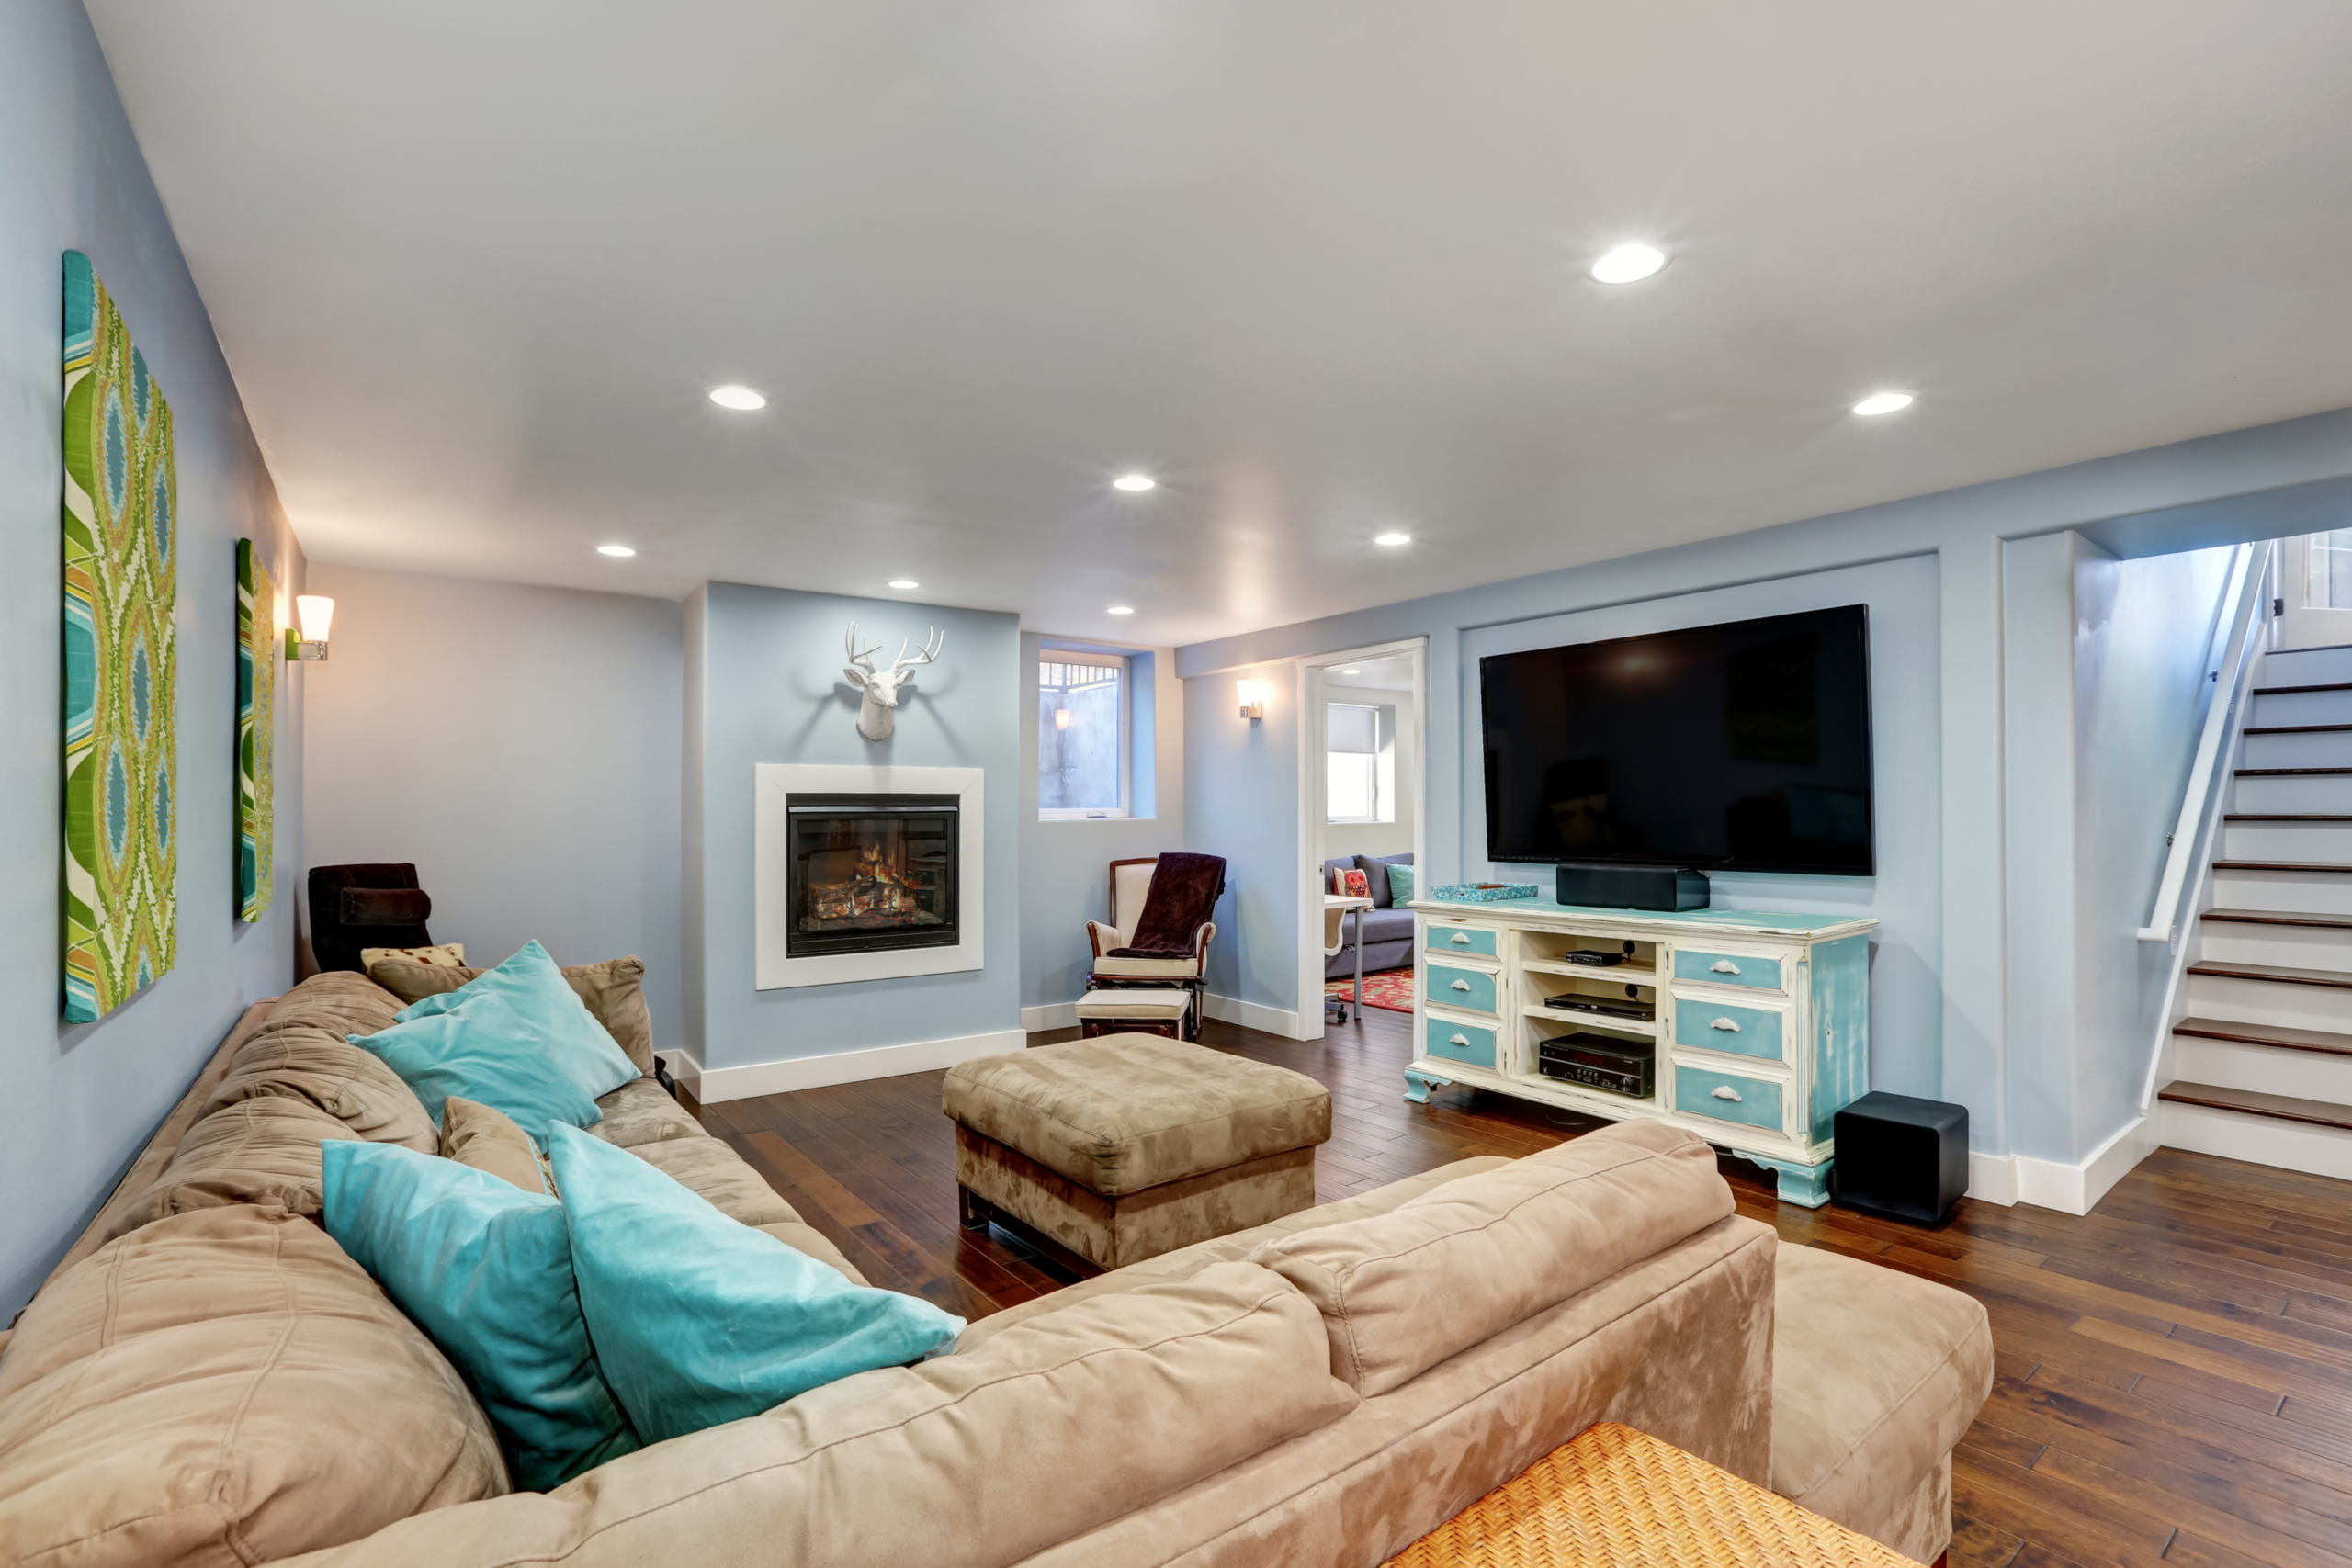 Planning Your Basement Remodel